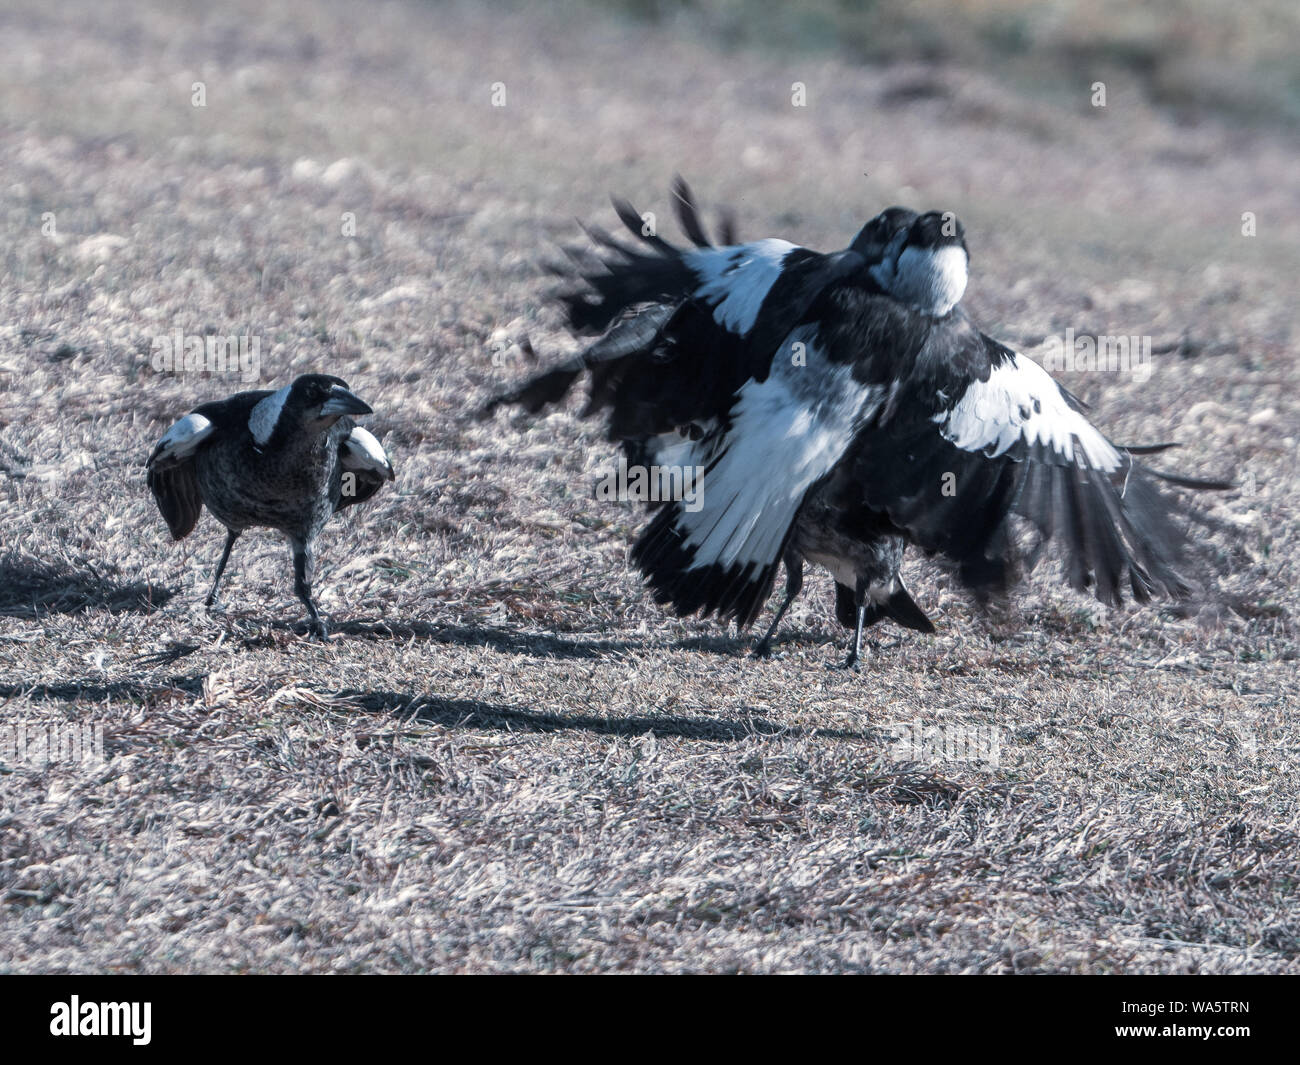 Australian Magpies, Birds.Young black and white feathered Magpies Play fighting in the dry grass. Flapping their wings Stock Photo